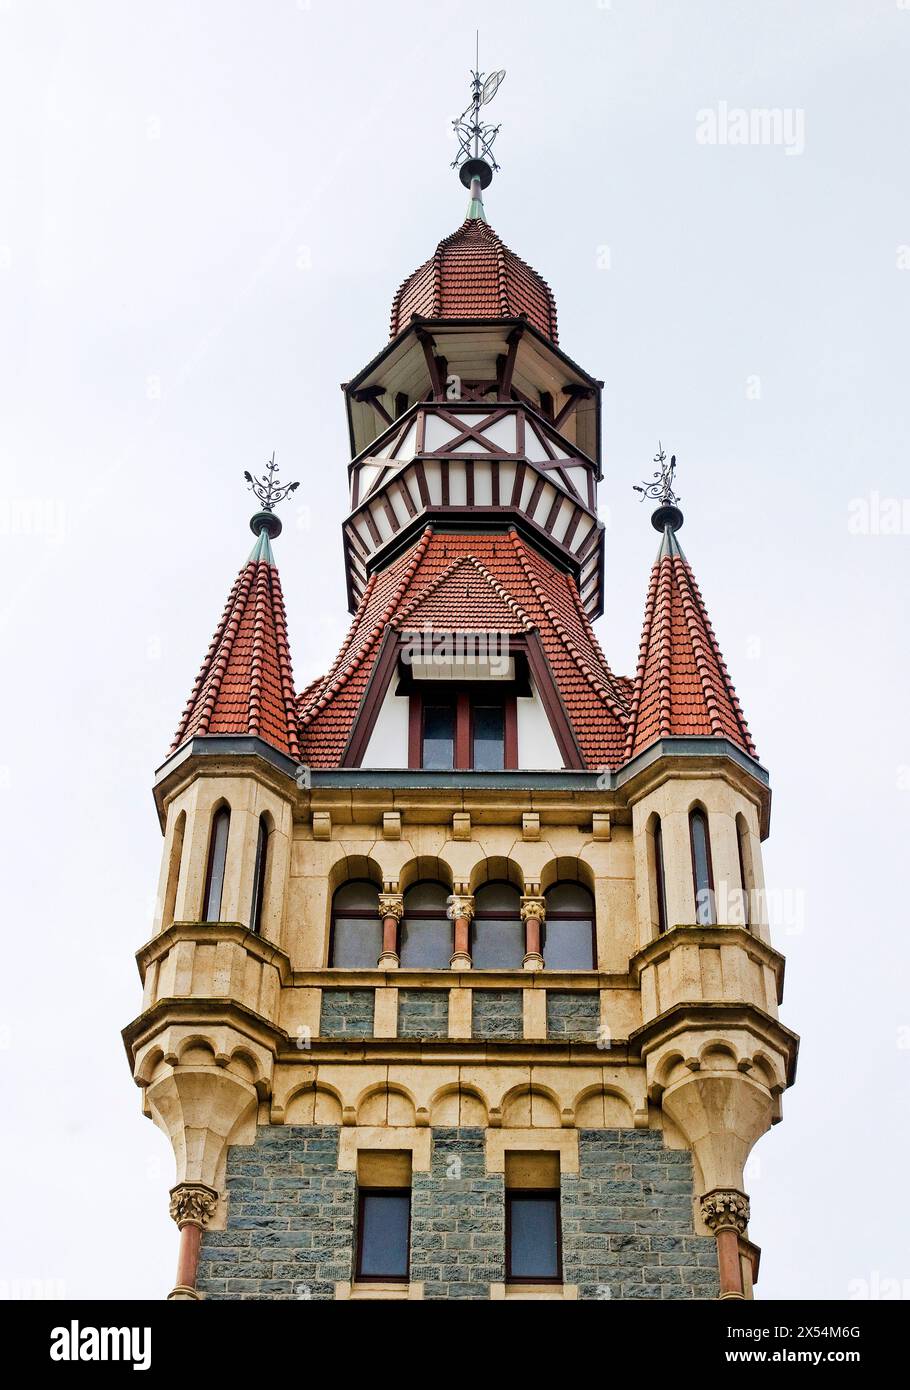 Tower of the historic Vohwinkel town hall, Germany, North Rhine-Westphalia, Bergisches Land, Wuppertal Stock Photo